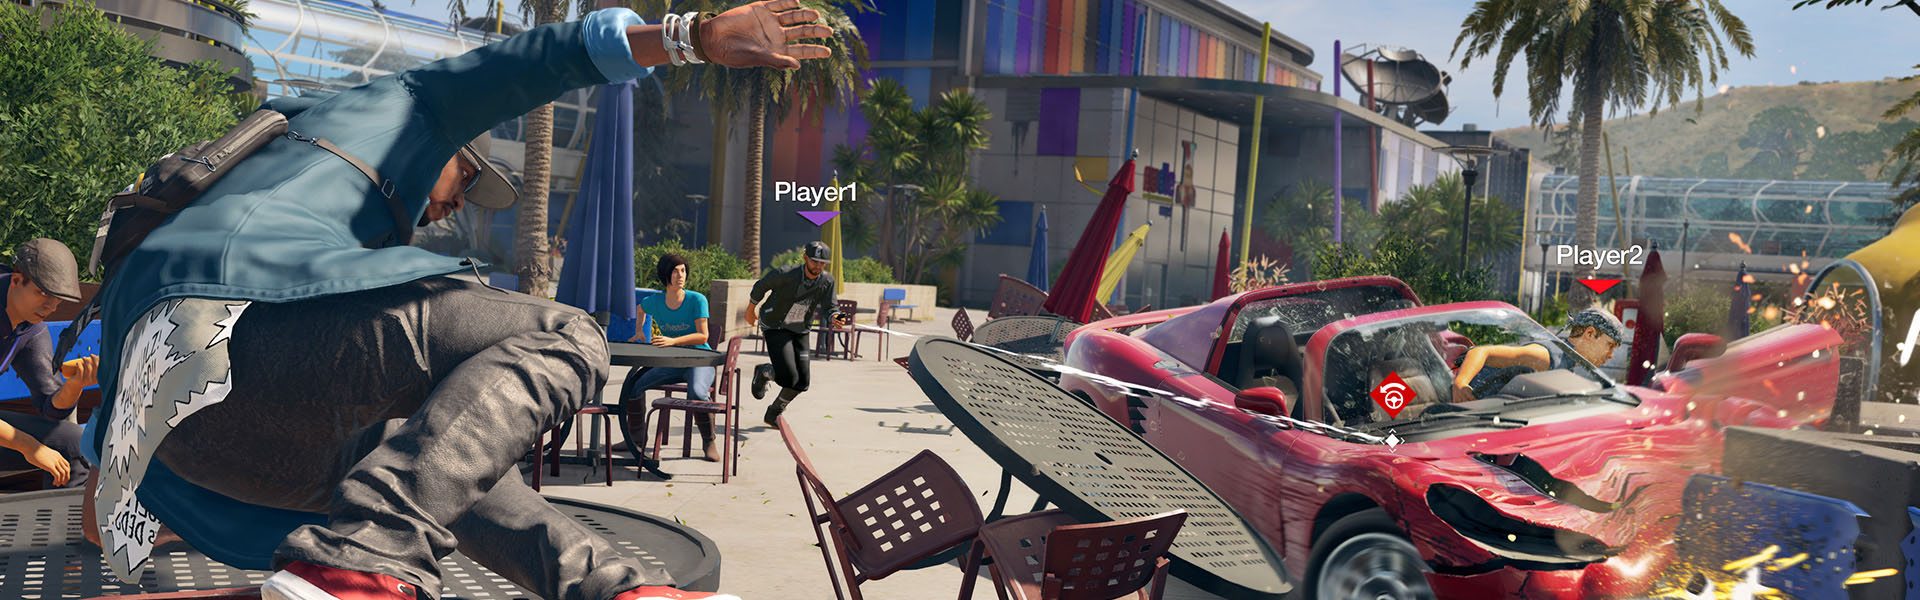 Ubisoft Unveils New Pvp Bounty Hunter Mode In Watch_Dogs 2 18